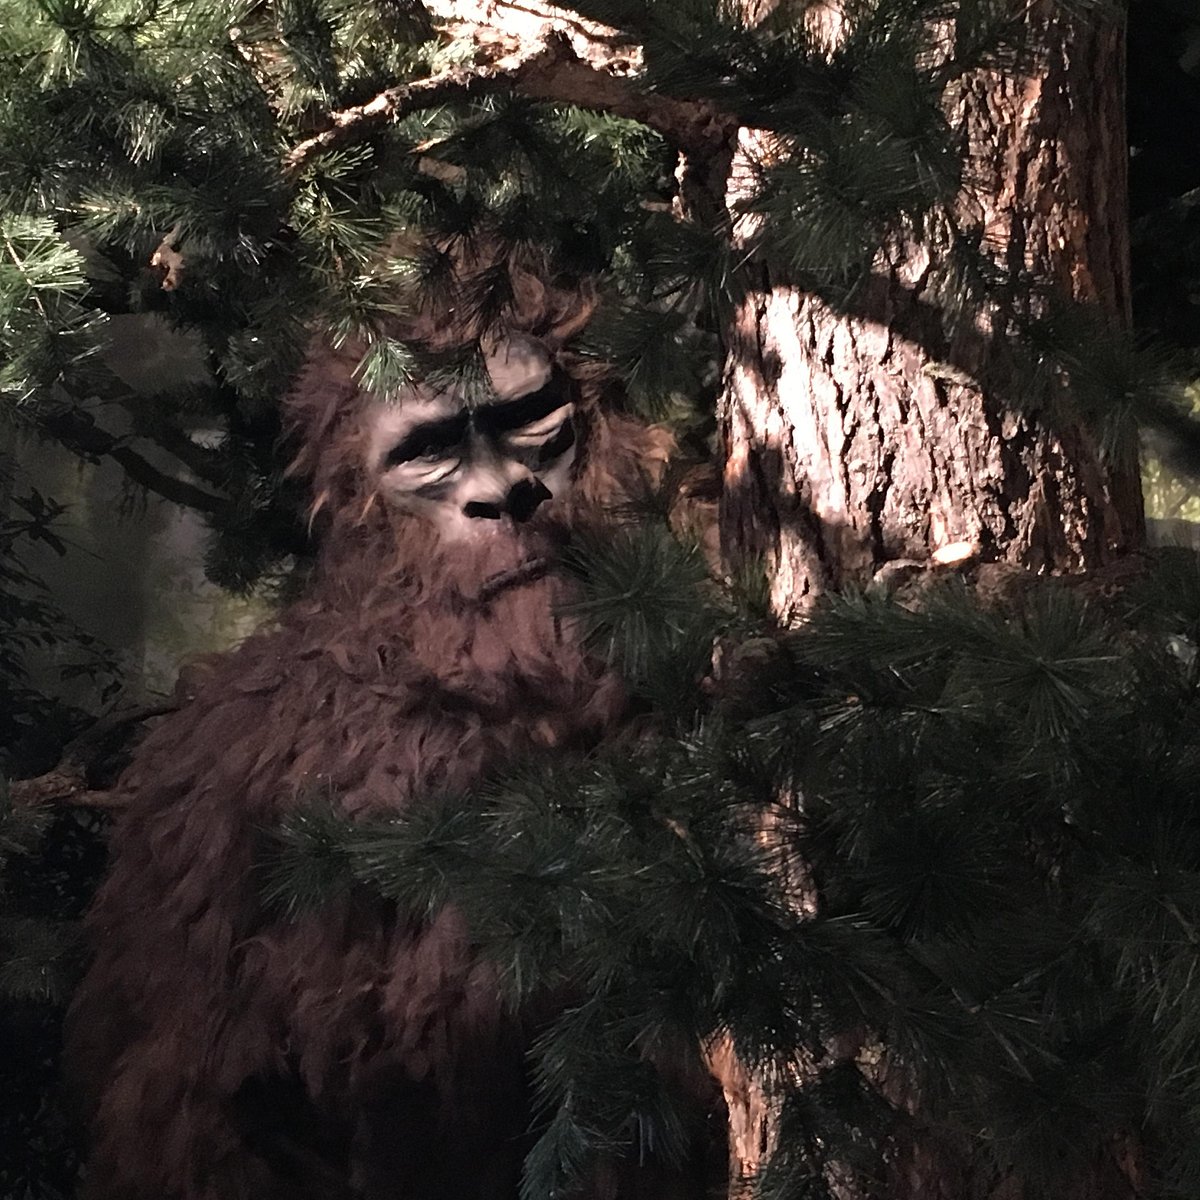 Bigfoot — do you believe? One Colorado museum wants to know